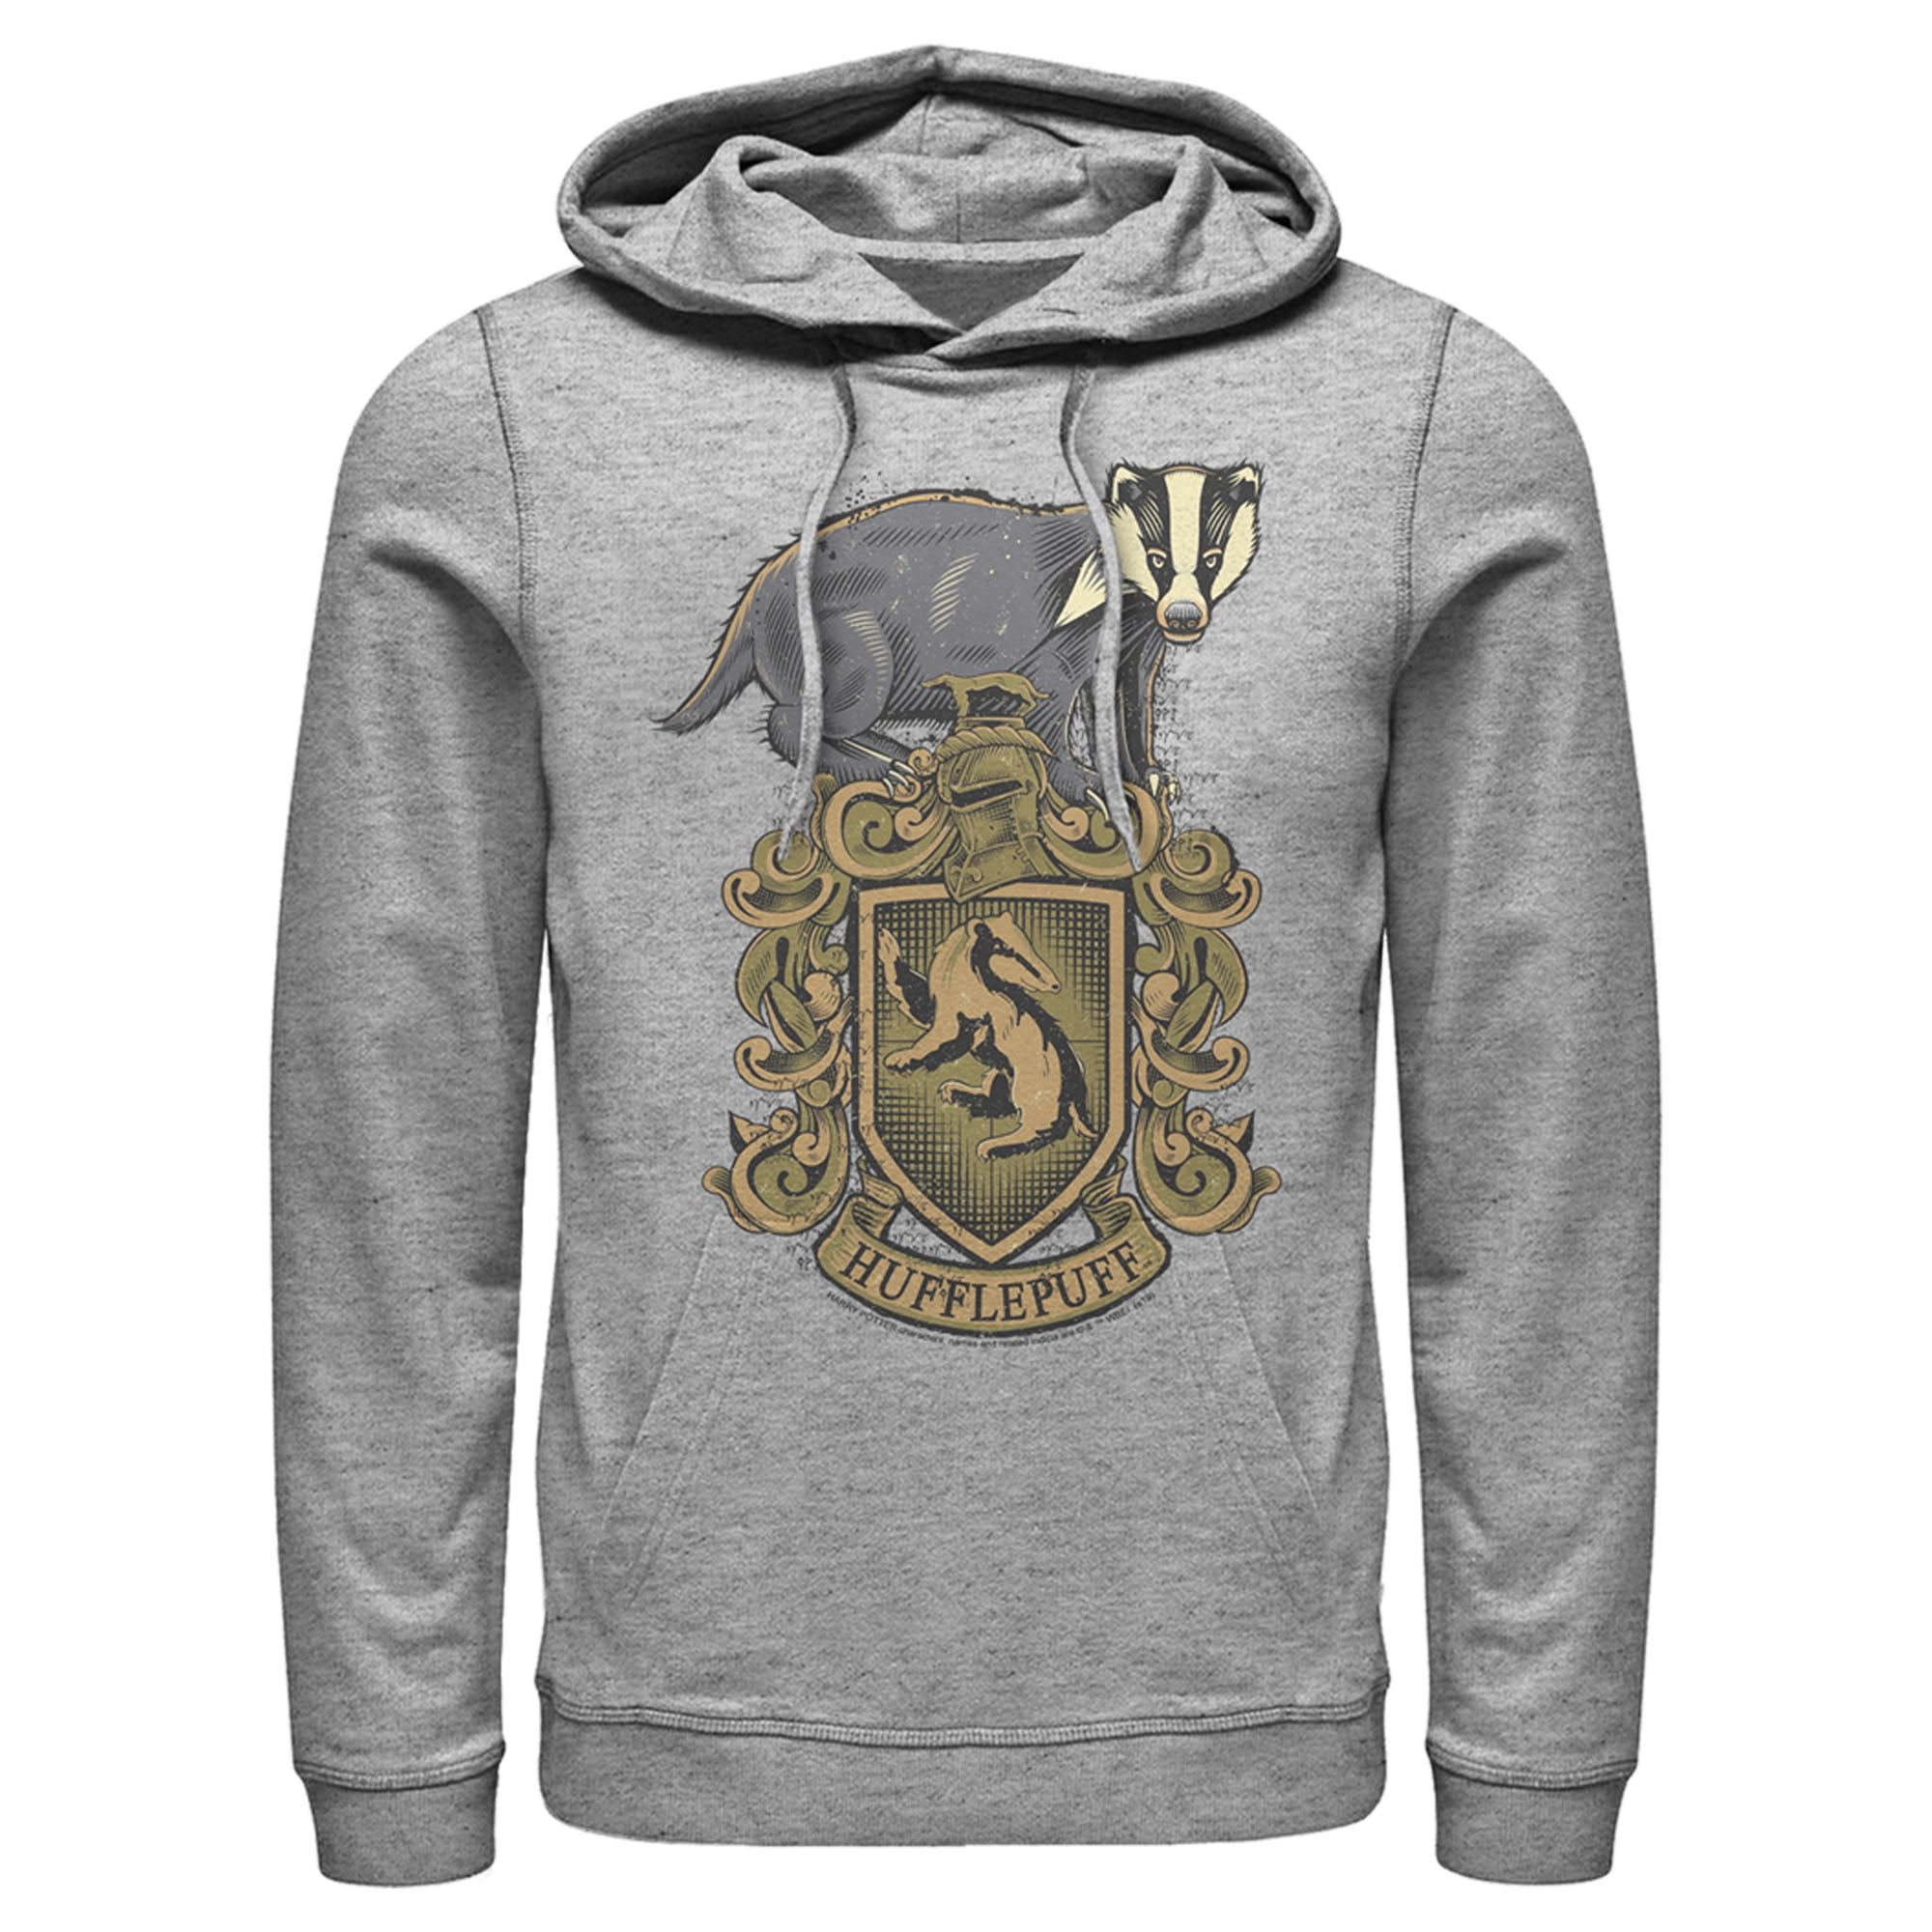 Unisex Hoodie Sweatshirt Gryffindor Ravenclaw Hufflepuff Slytherin Pullover for Spring and Autumn Harry Potter Pullover Hoody Color : Blue, Size : 2X-Large 